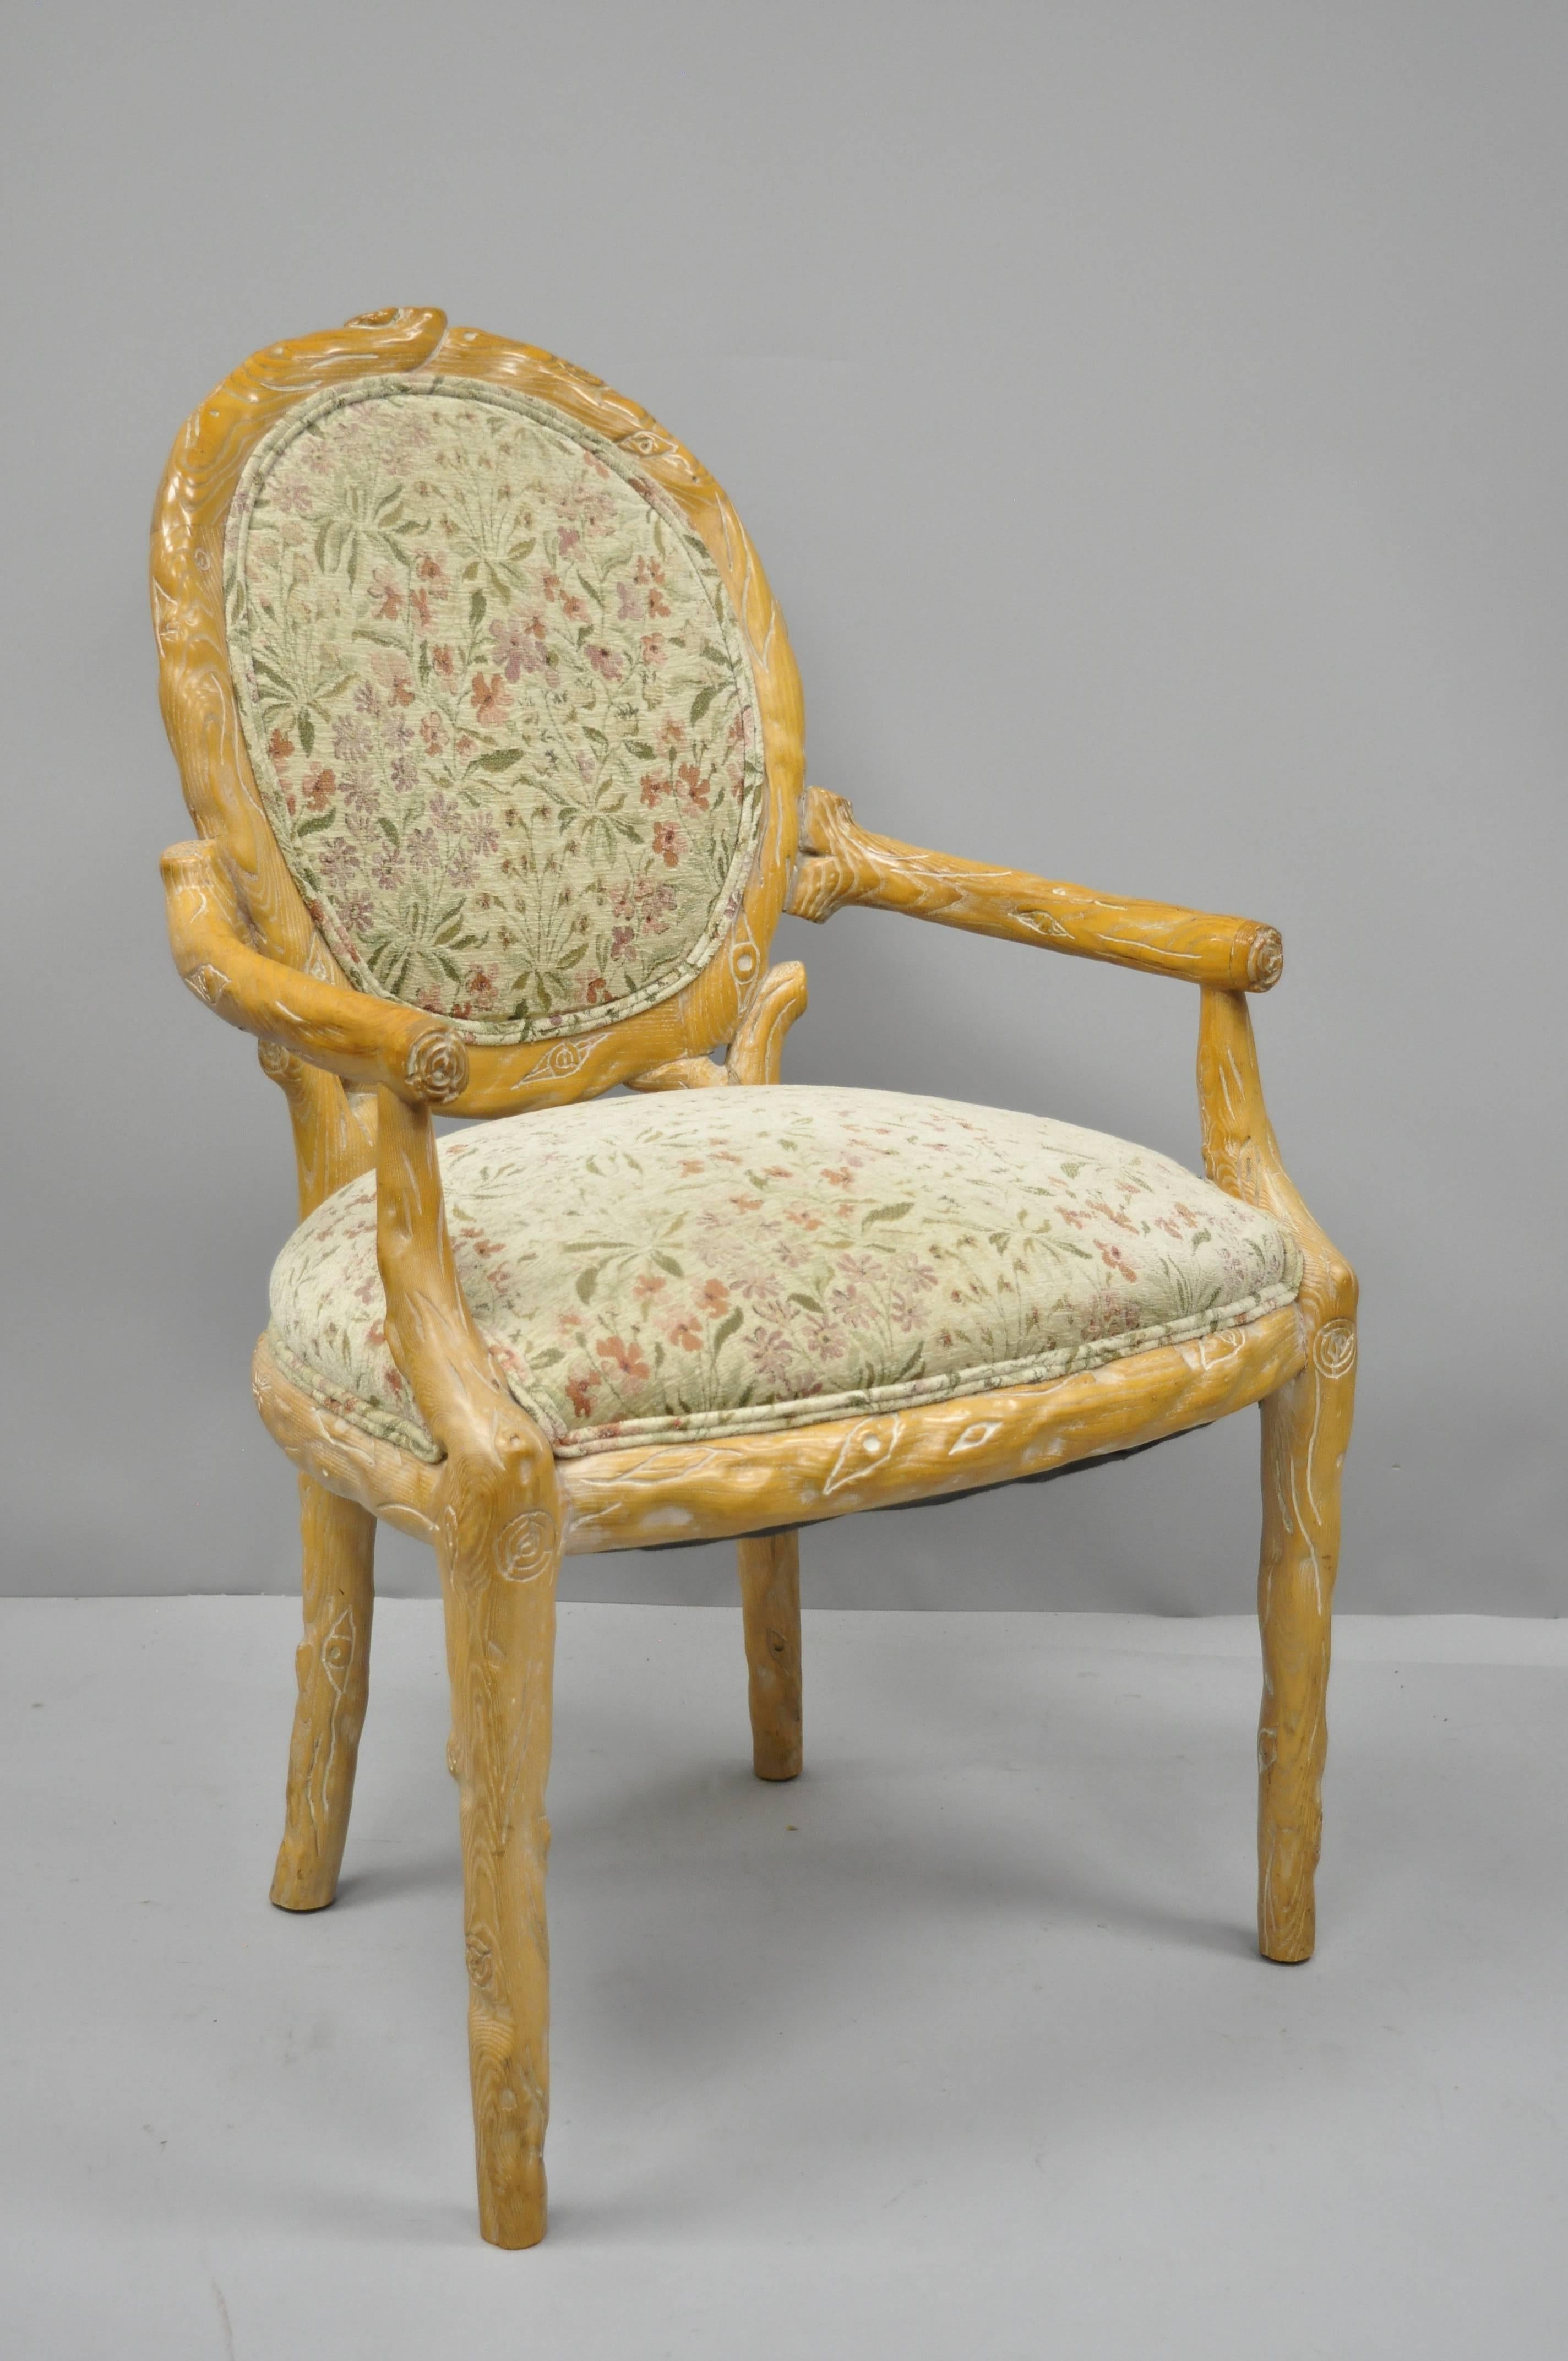 Vintage faux bois upholstered armchair. Item features heavy solid wood construction, nicely carved details, tapered legs, cream colored fabric, and quality American craftsmanship, circa mid-late 20th century. Measurements: 38